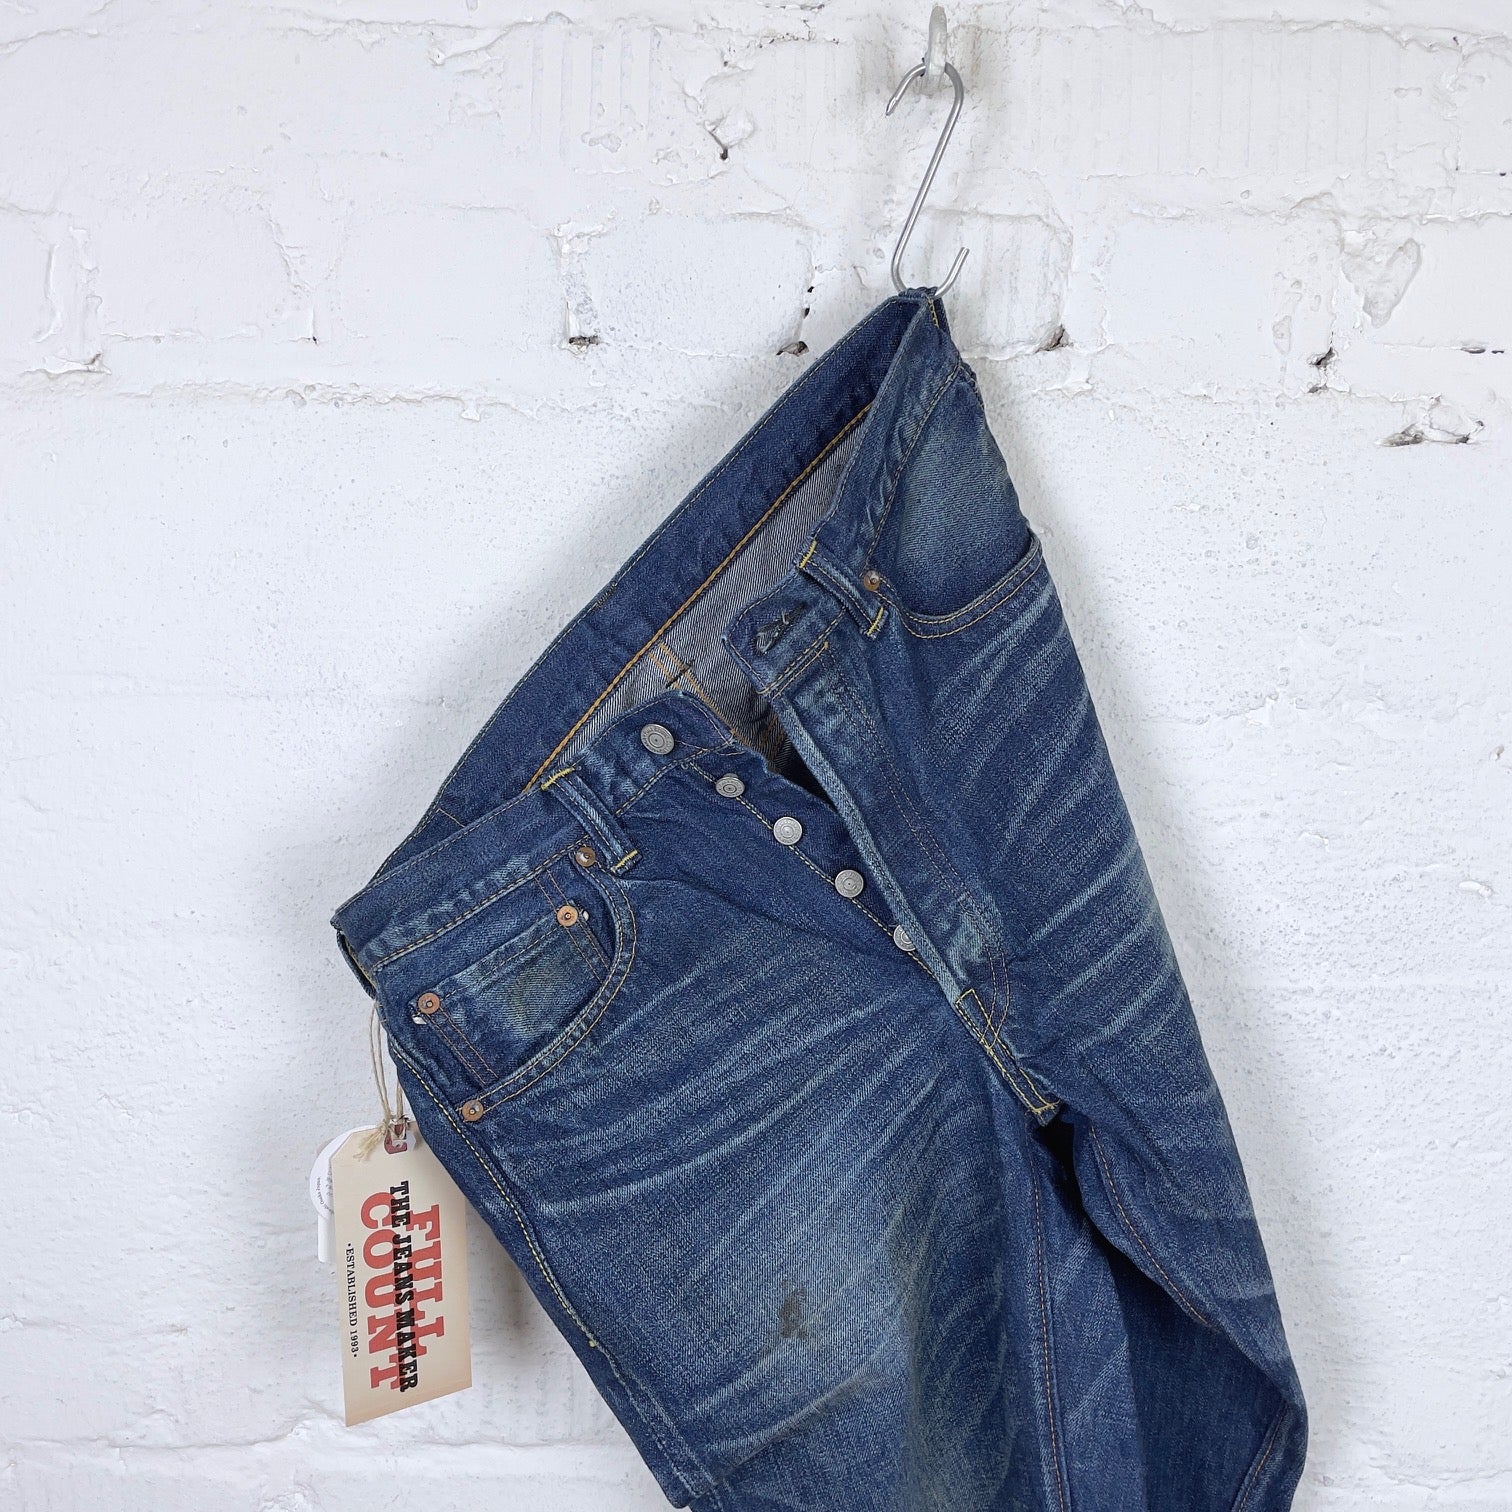 1344-1101 more than real straight selvedge jeans